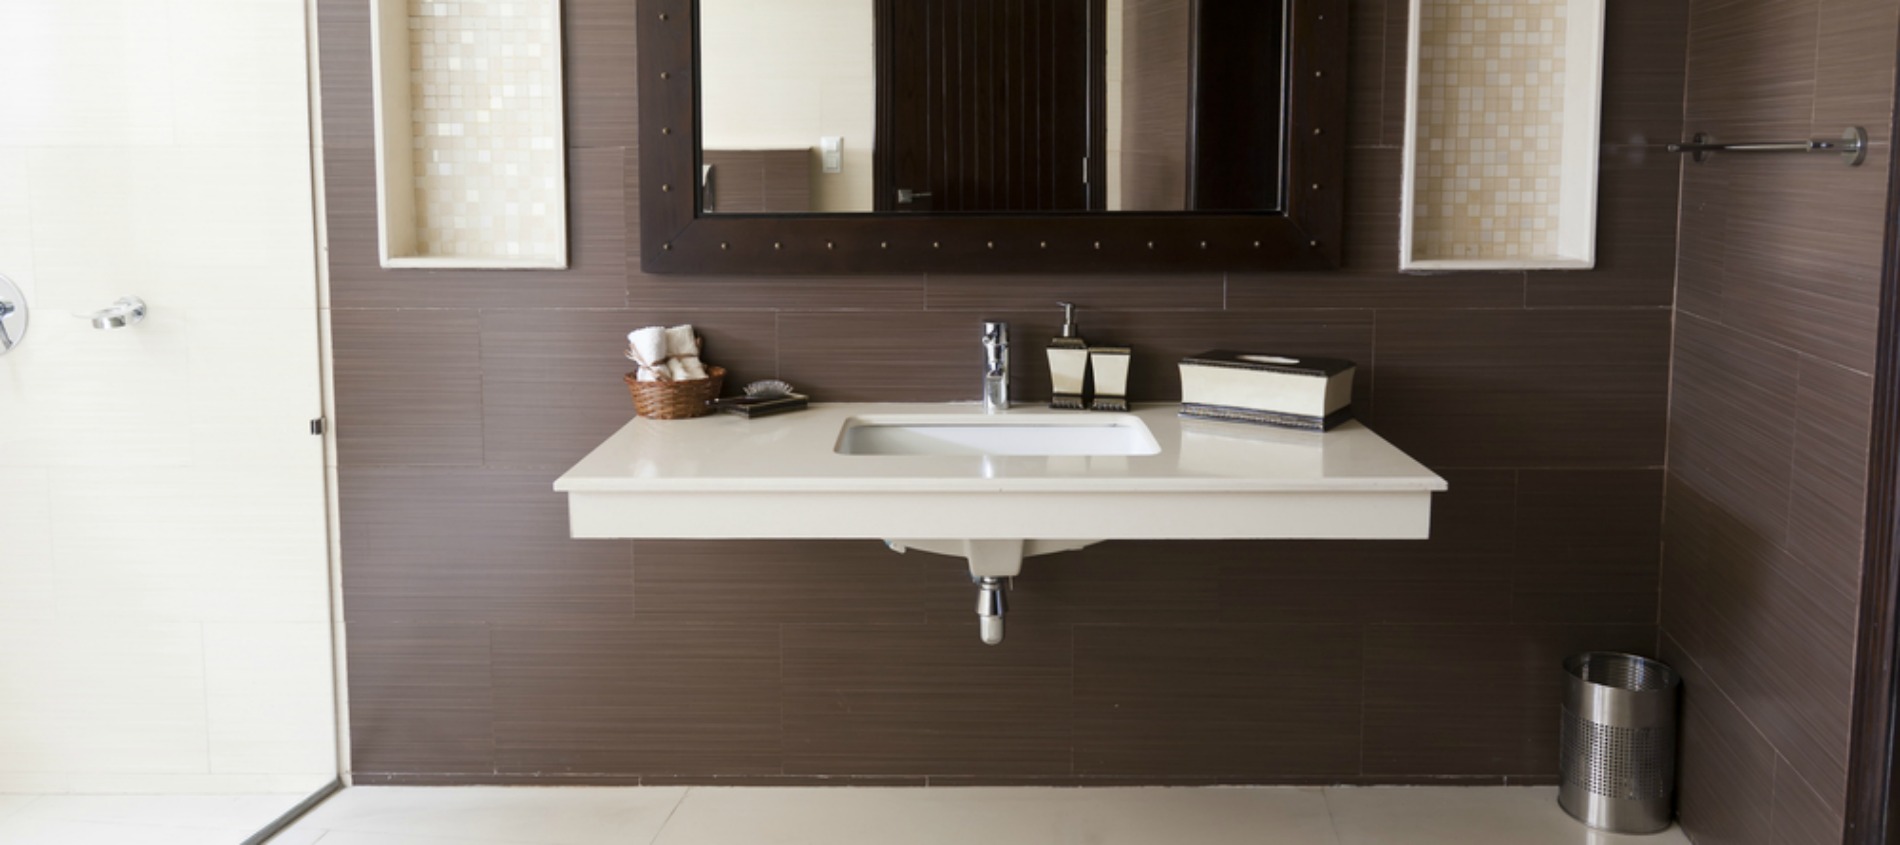 5 Ways To Conceal A Waste Pipe Under A Vanity The Plumbette